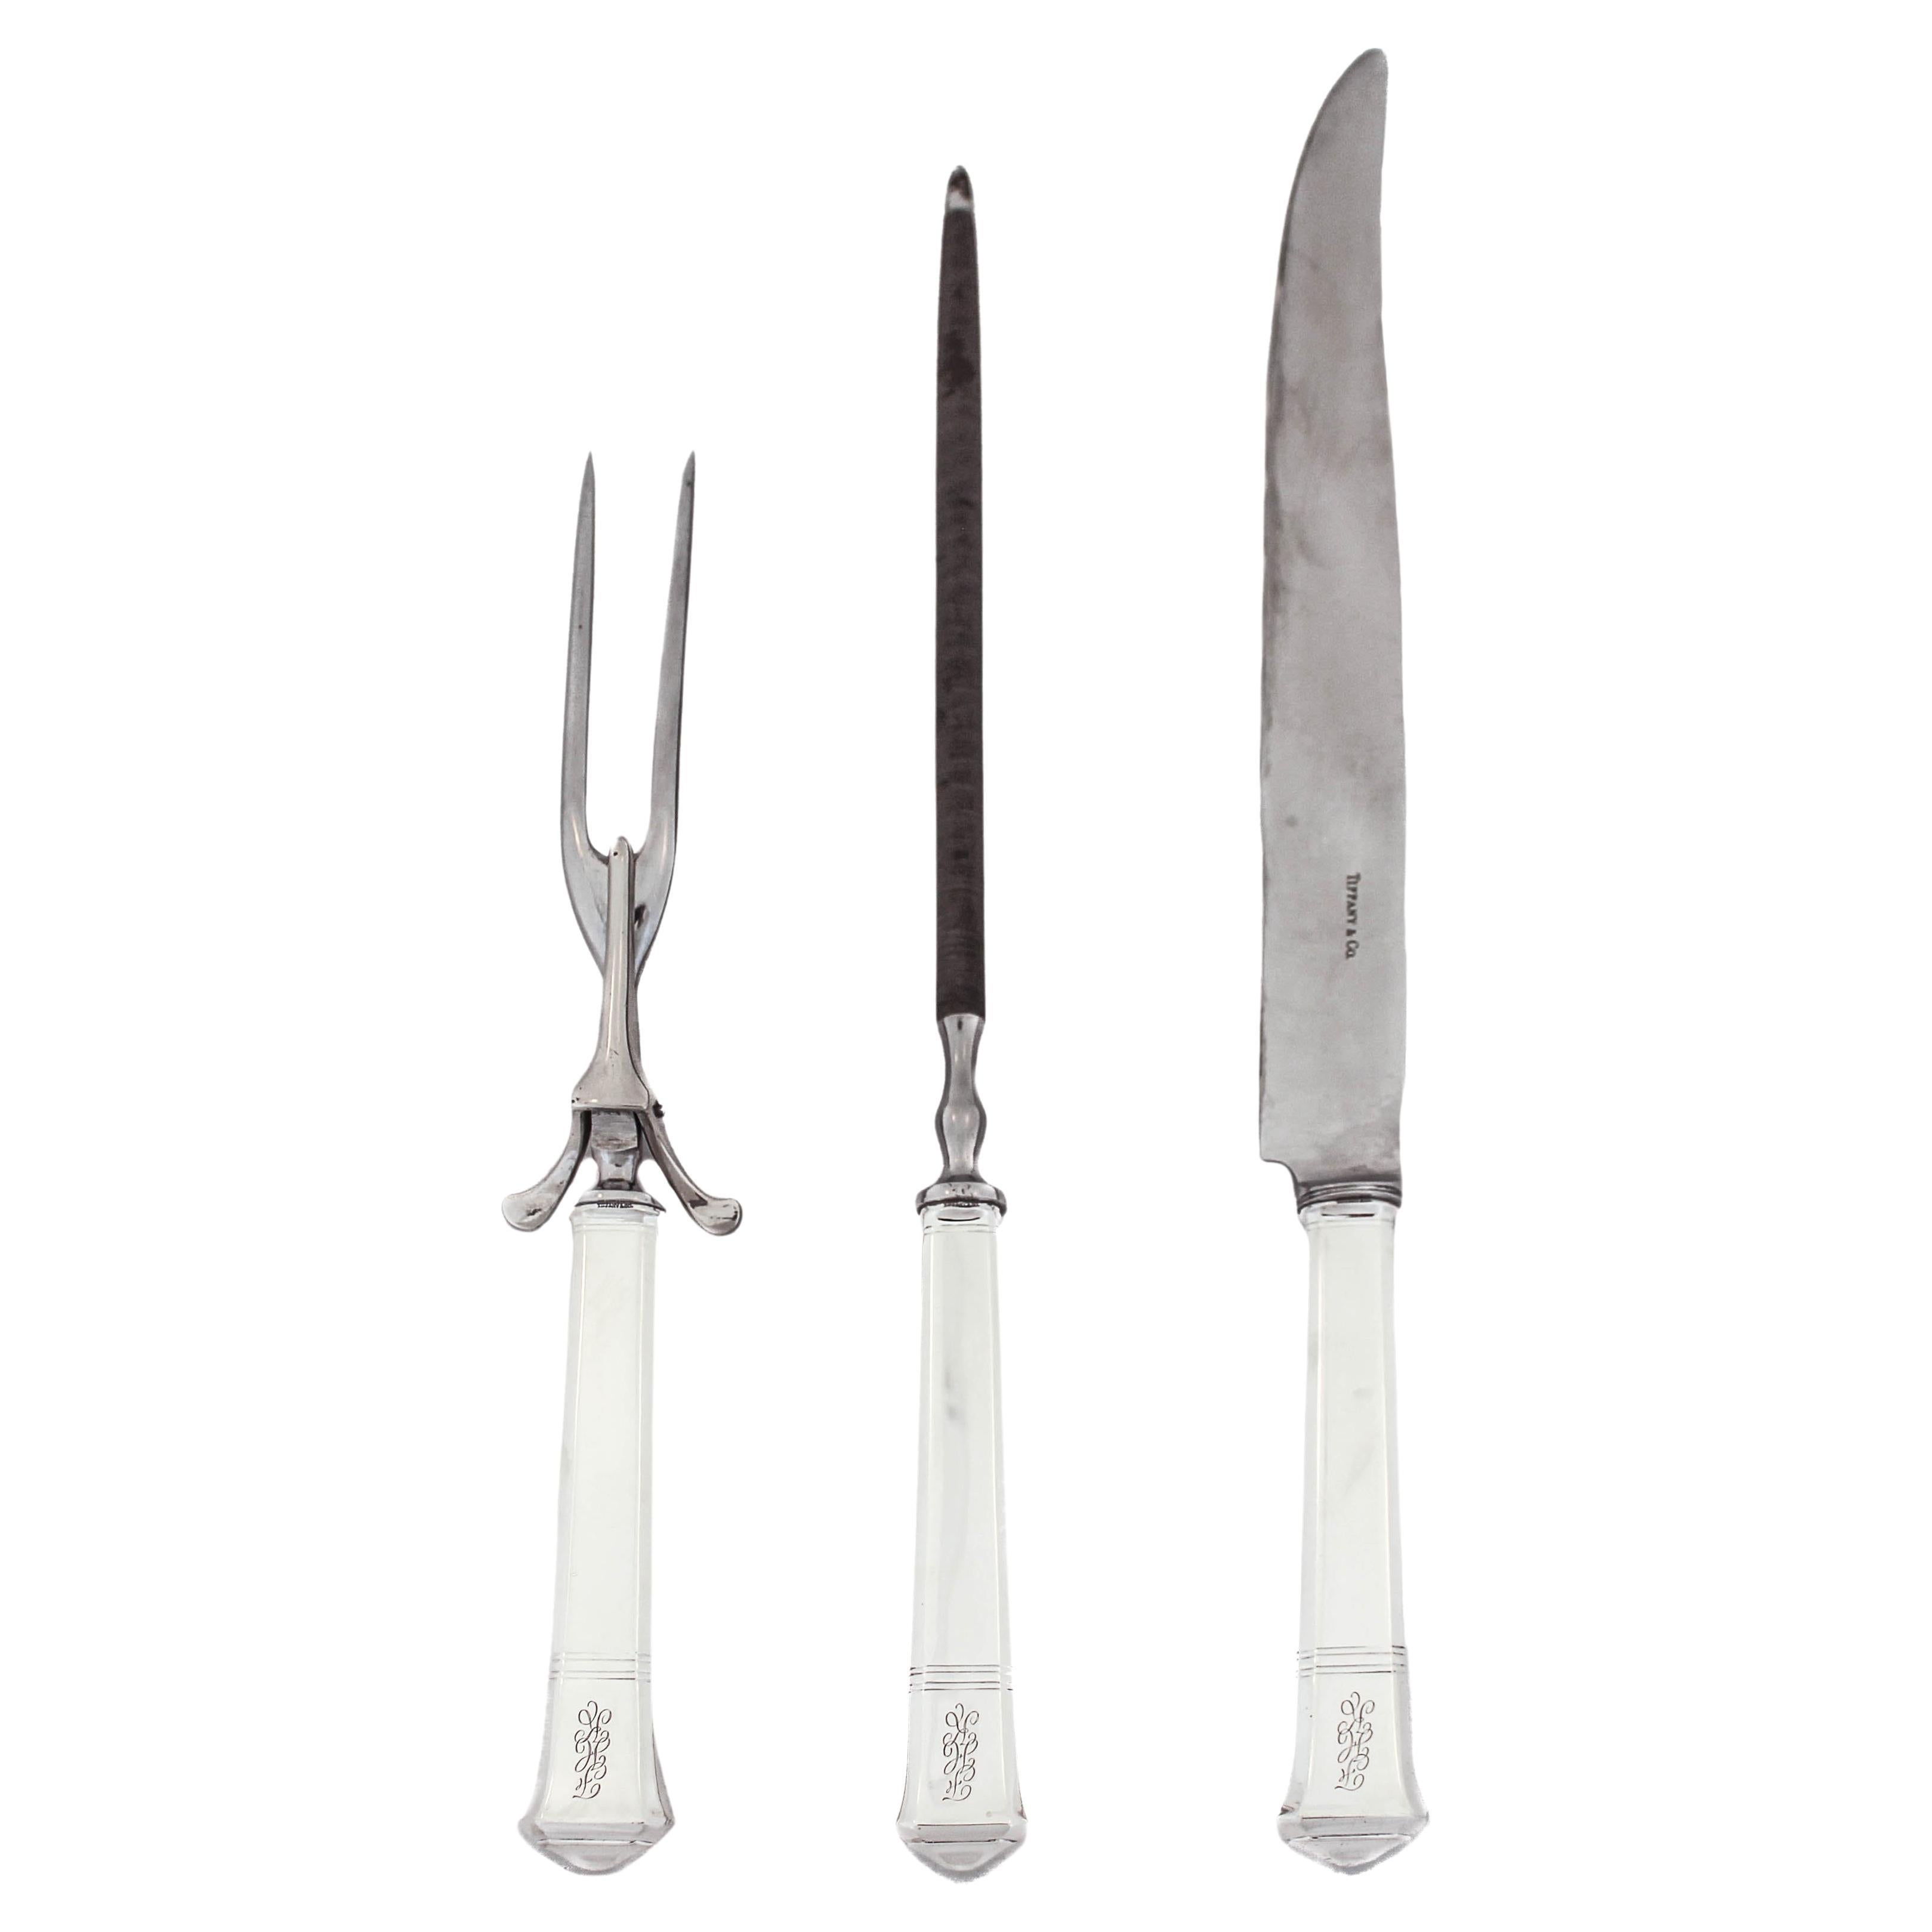 What is a carving fork used for?